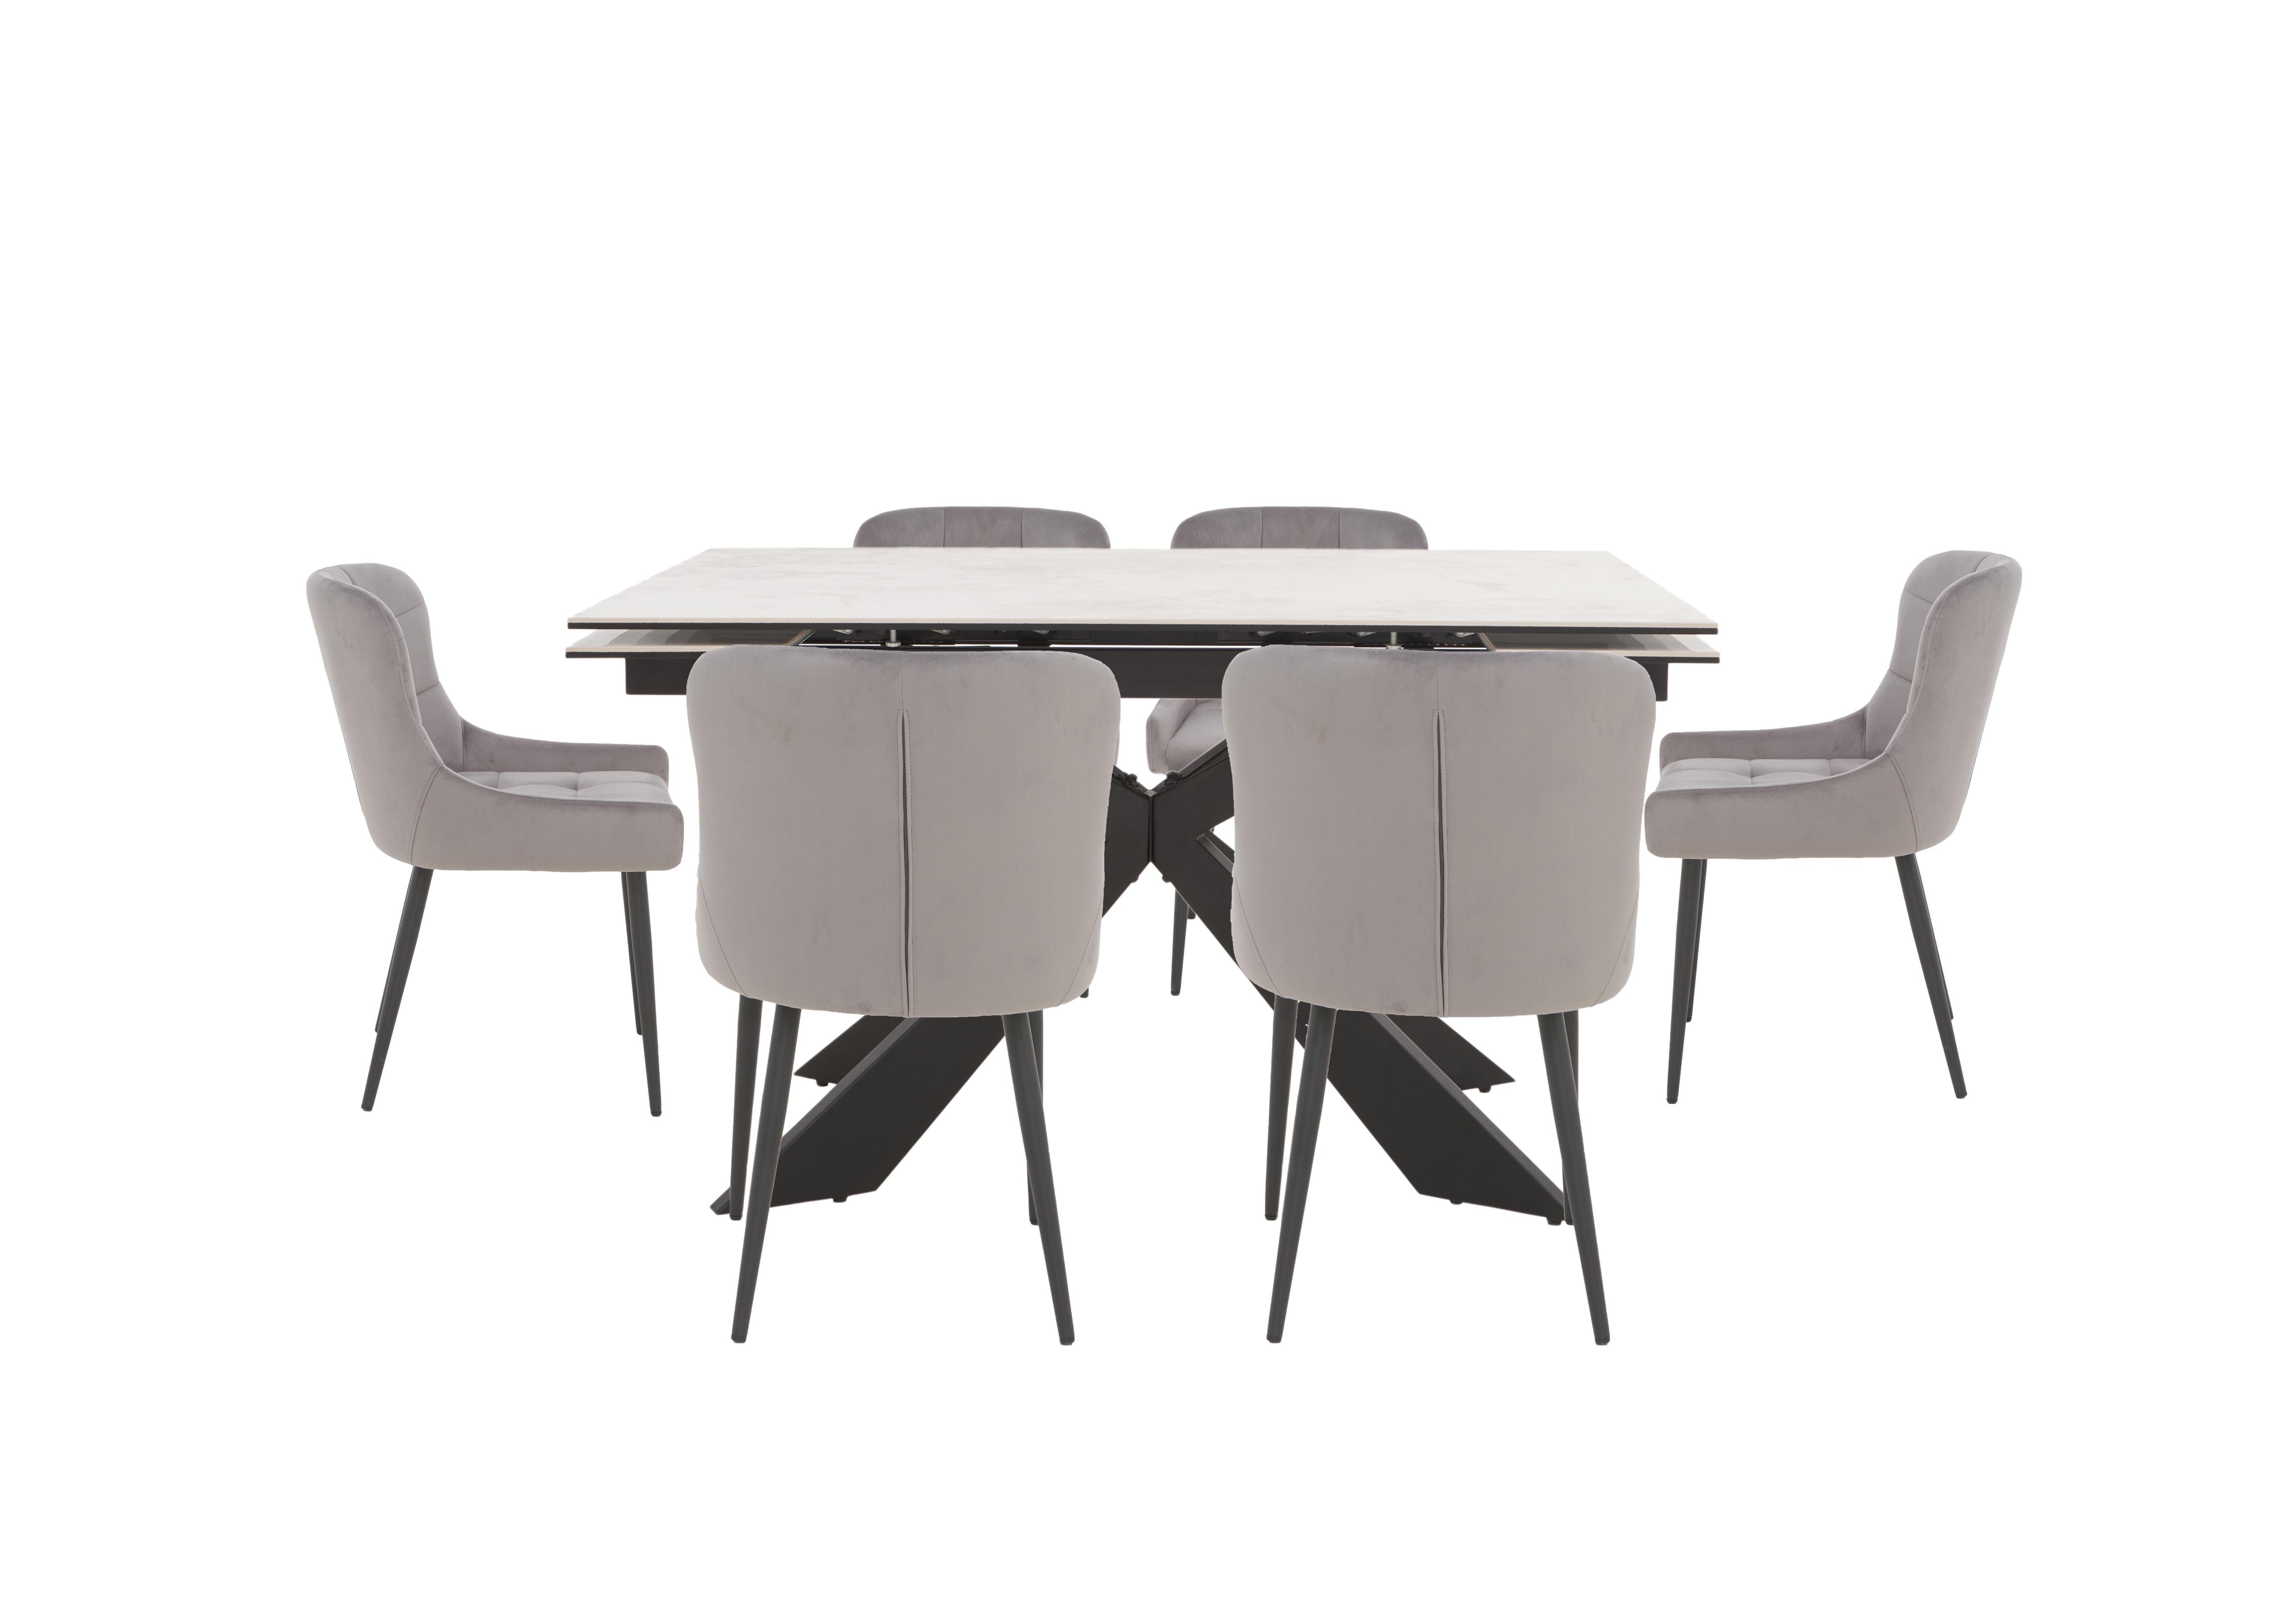 Kos Extending Dining Table with 6 Velvet Dining Chairs Dining Set in Granite on Furniture Village